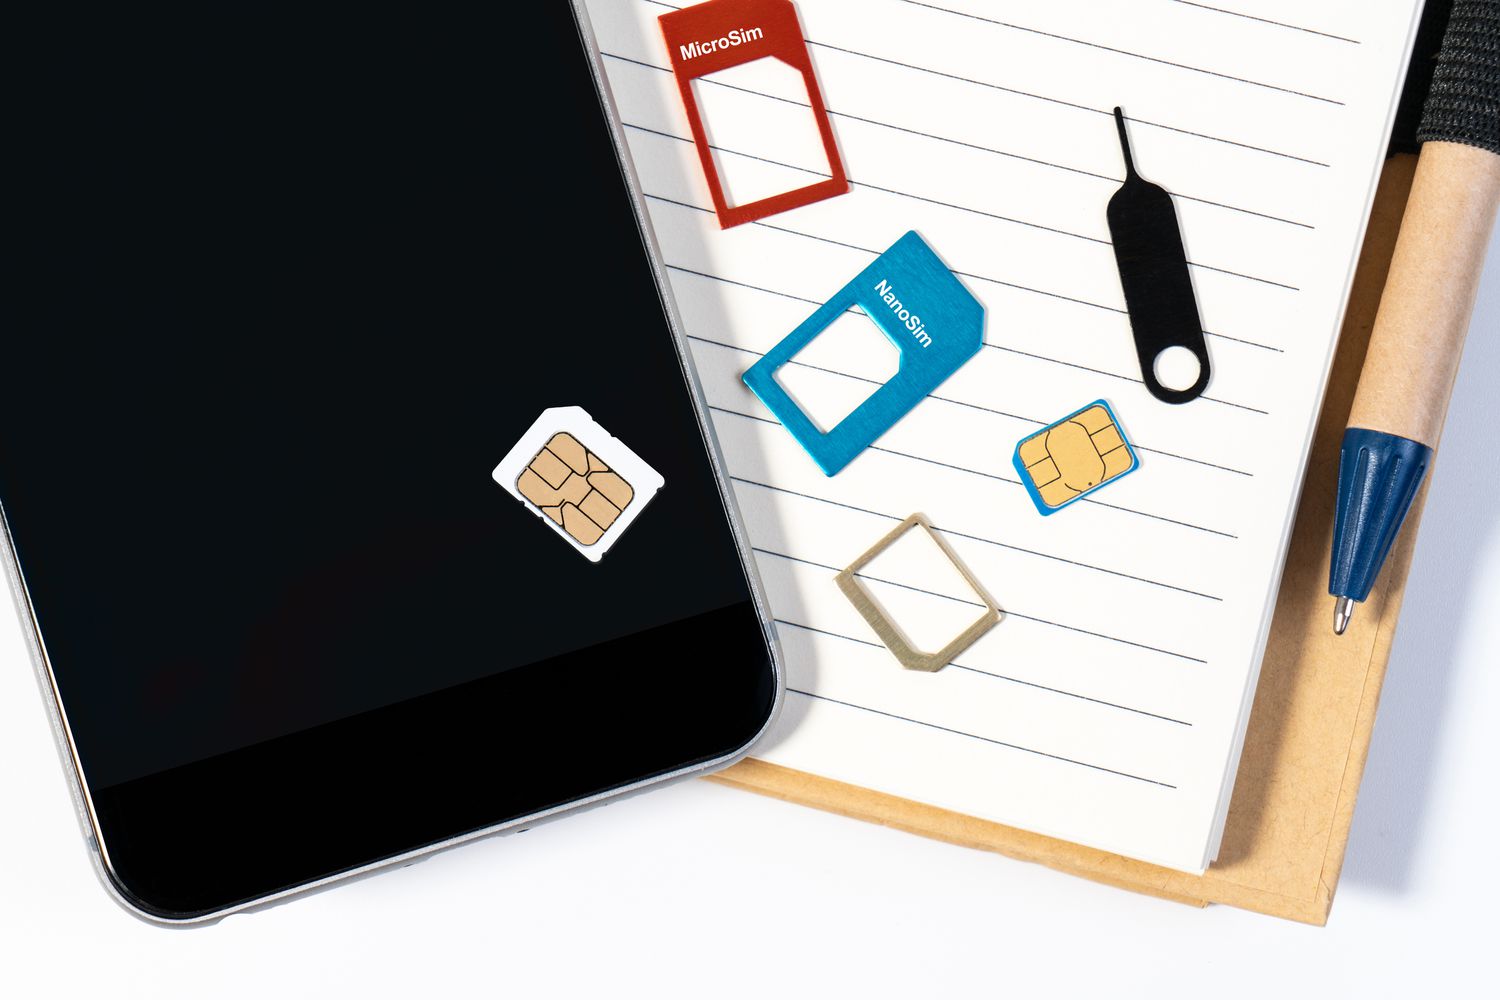 Installing A New SIM Card In Your Phone: Instructions